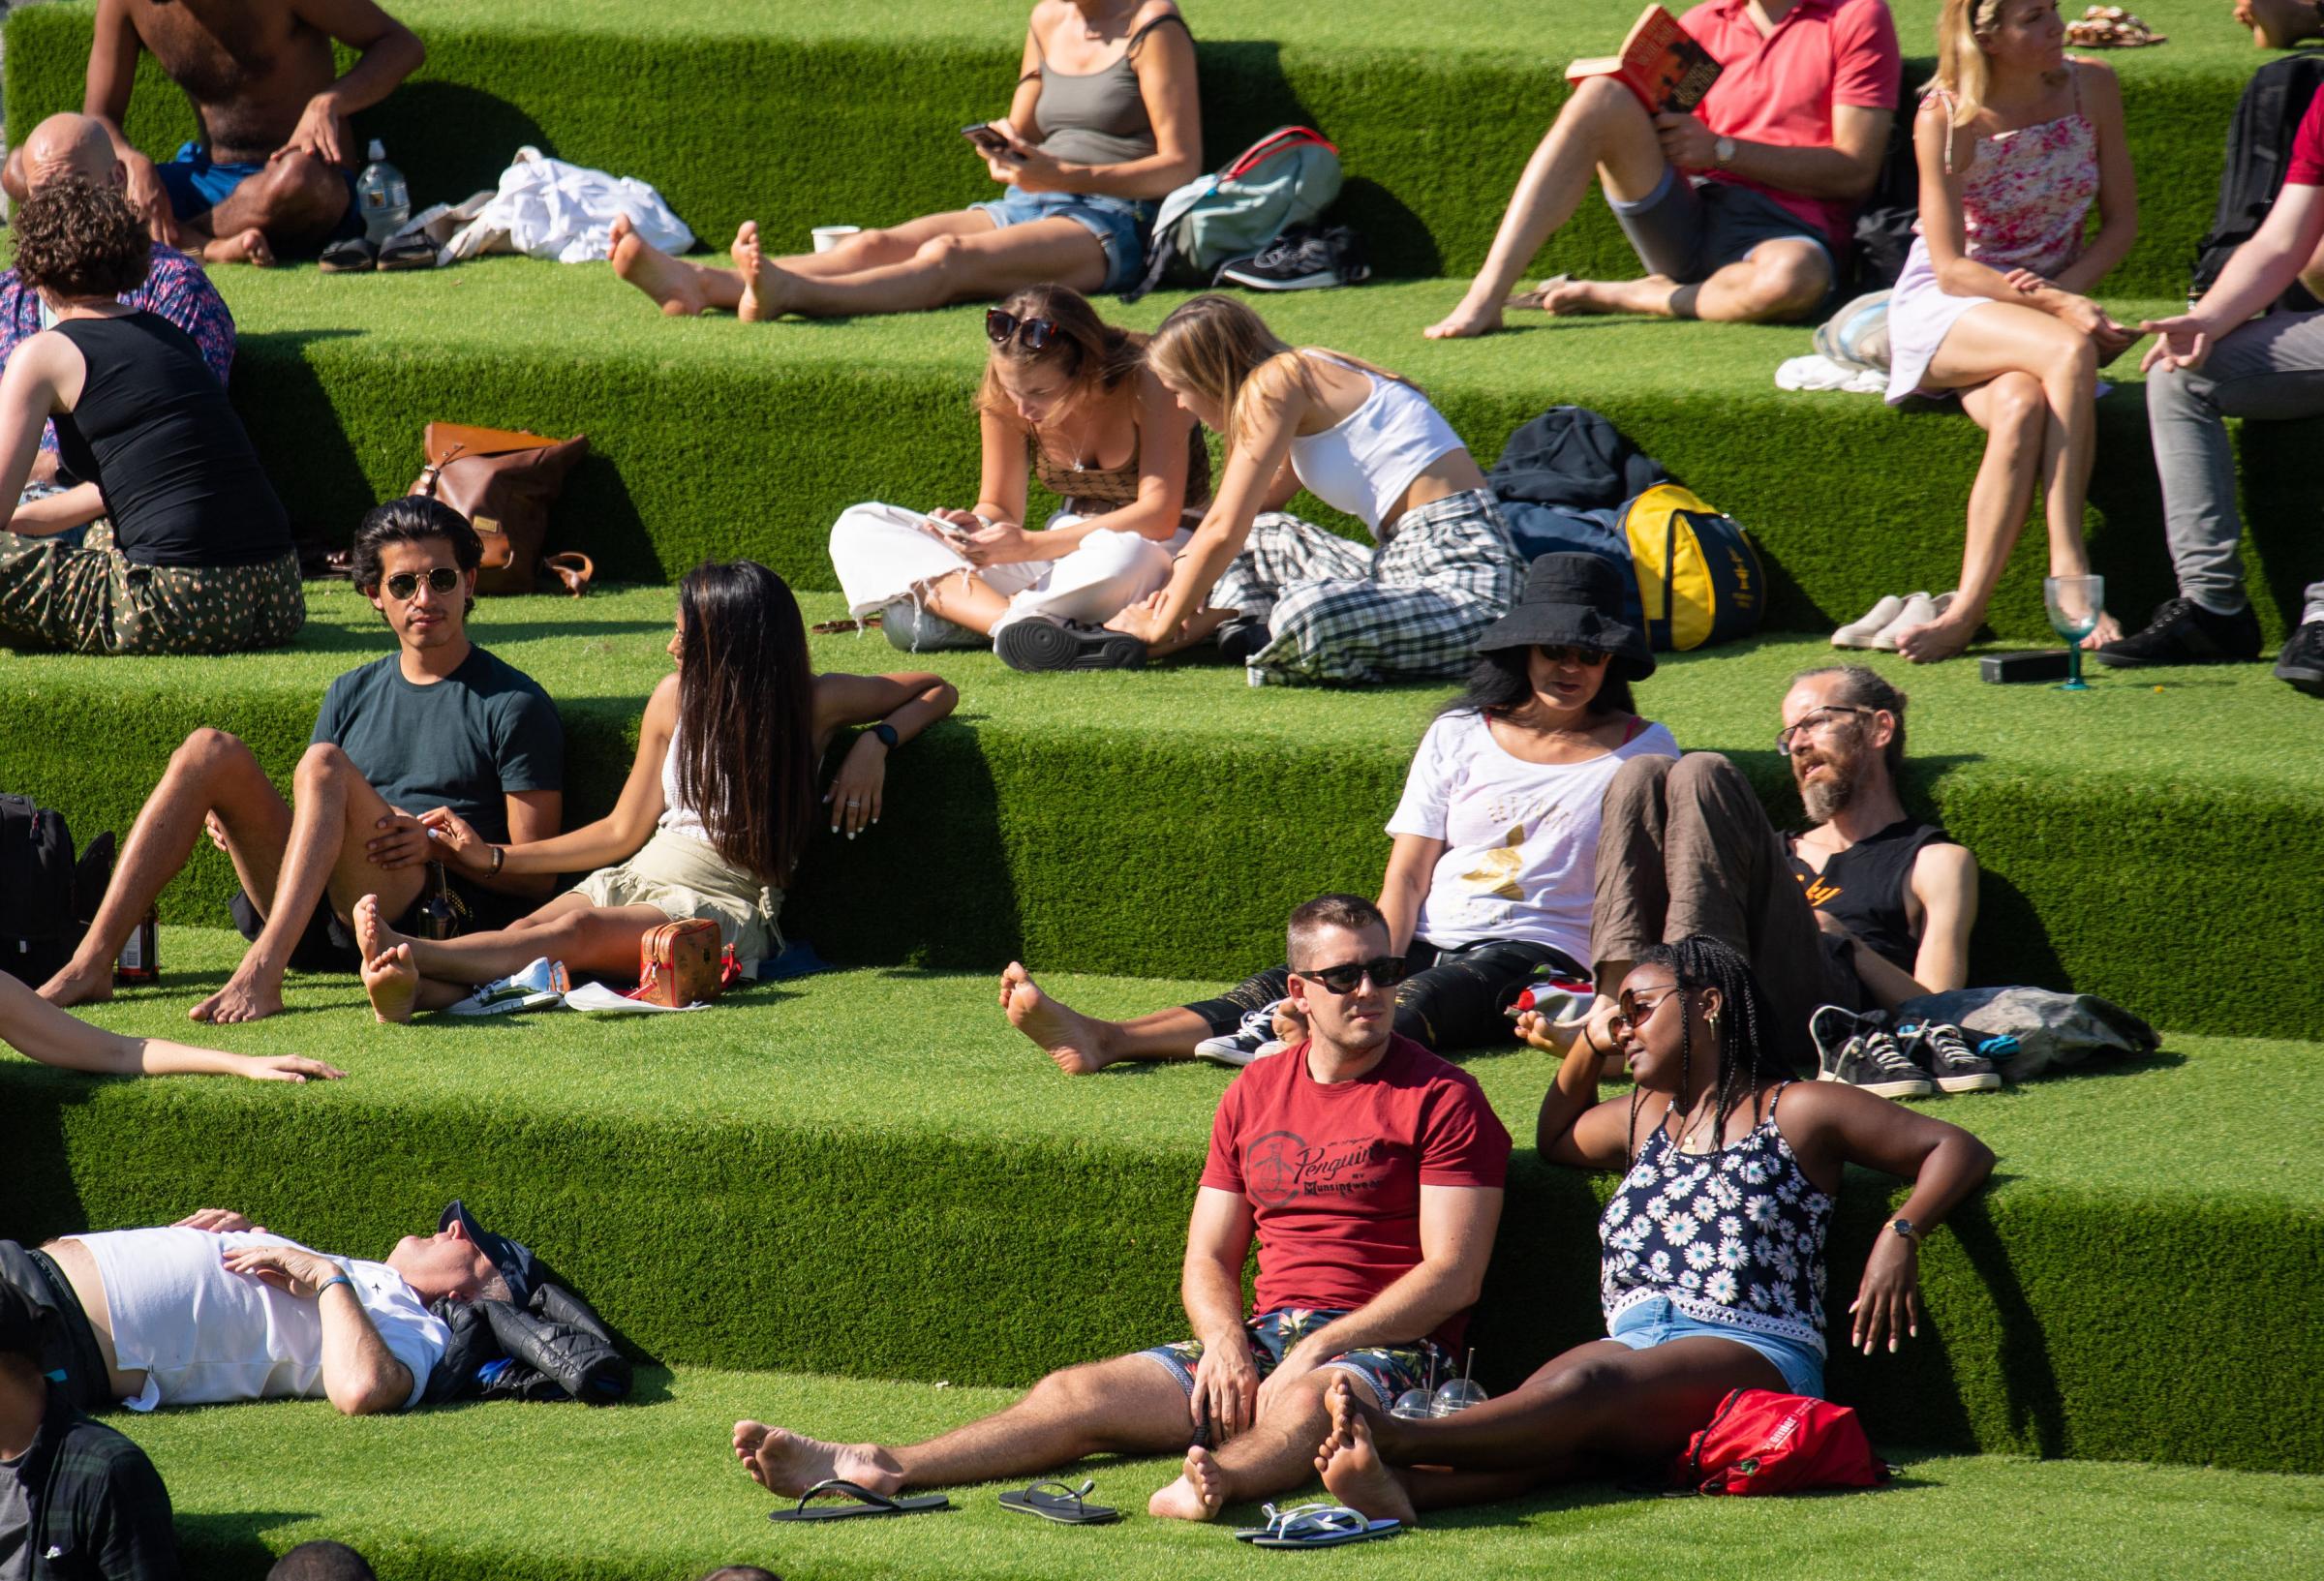 People enjoying the Autumn sunshine in Kings Cross, London. The public has been urged to act in tune with Covid-19 guidelines before the rule of six restrictions come into force on Monday. PA Photo. Picture date: Sunday September 13, 2020. Photo